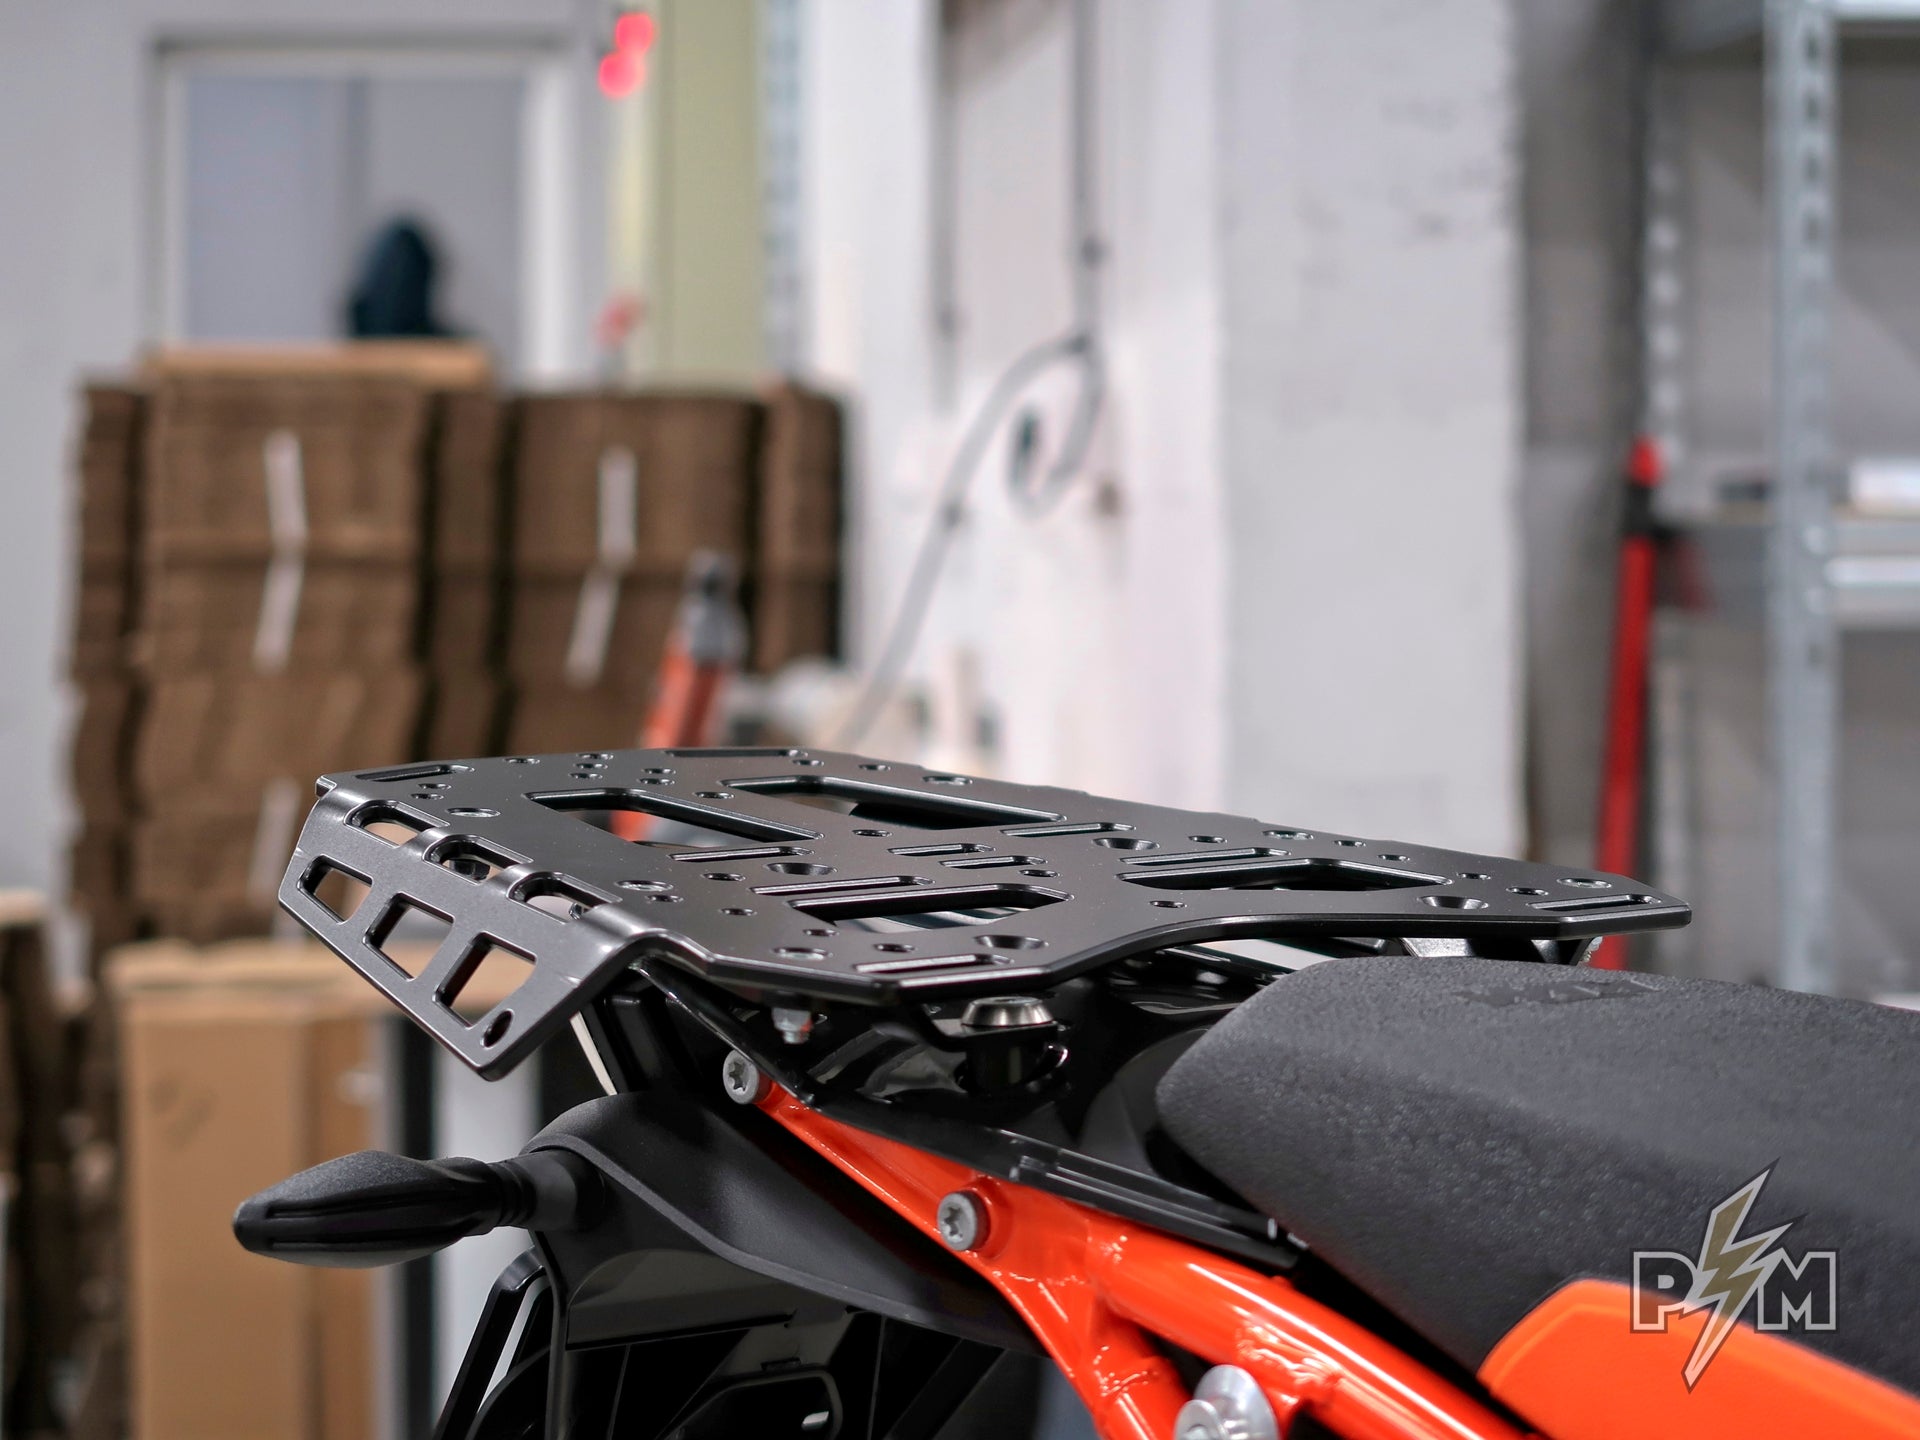 790/890/1X90 Top luggage rack on KTM 790 Adventure R - brief overview